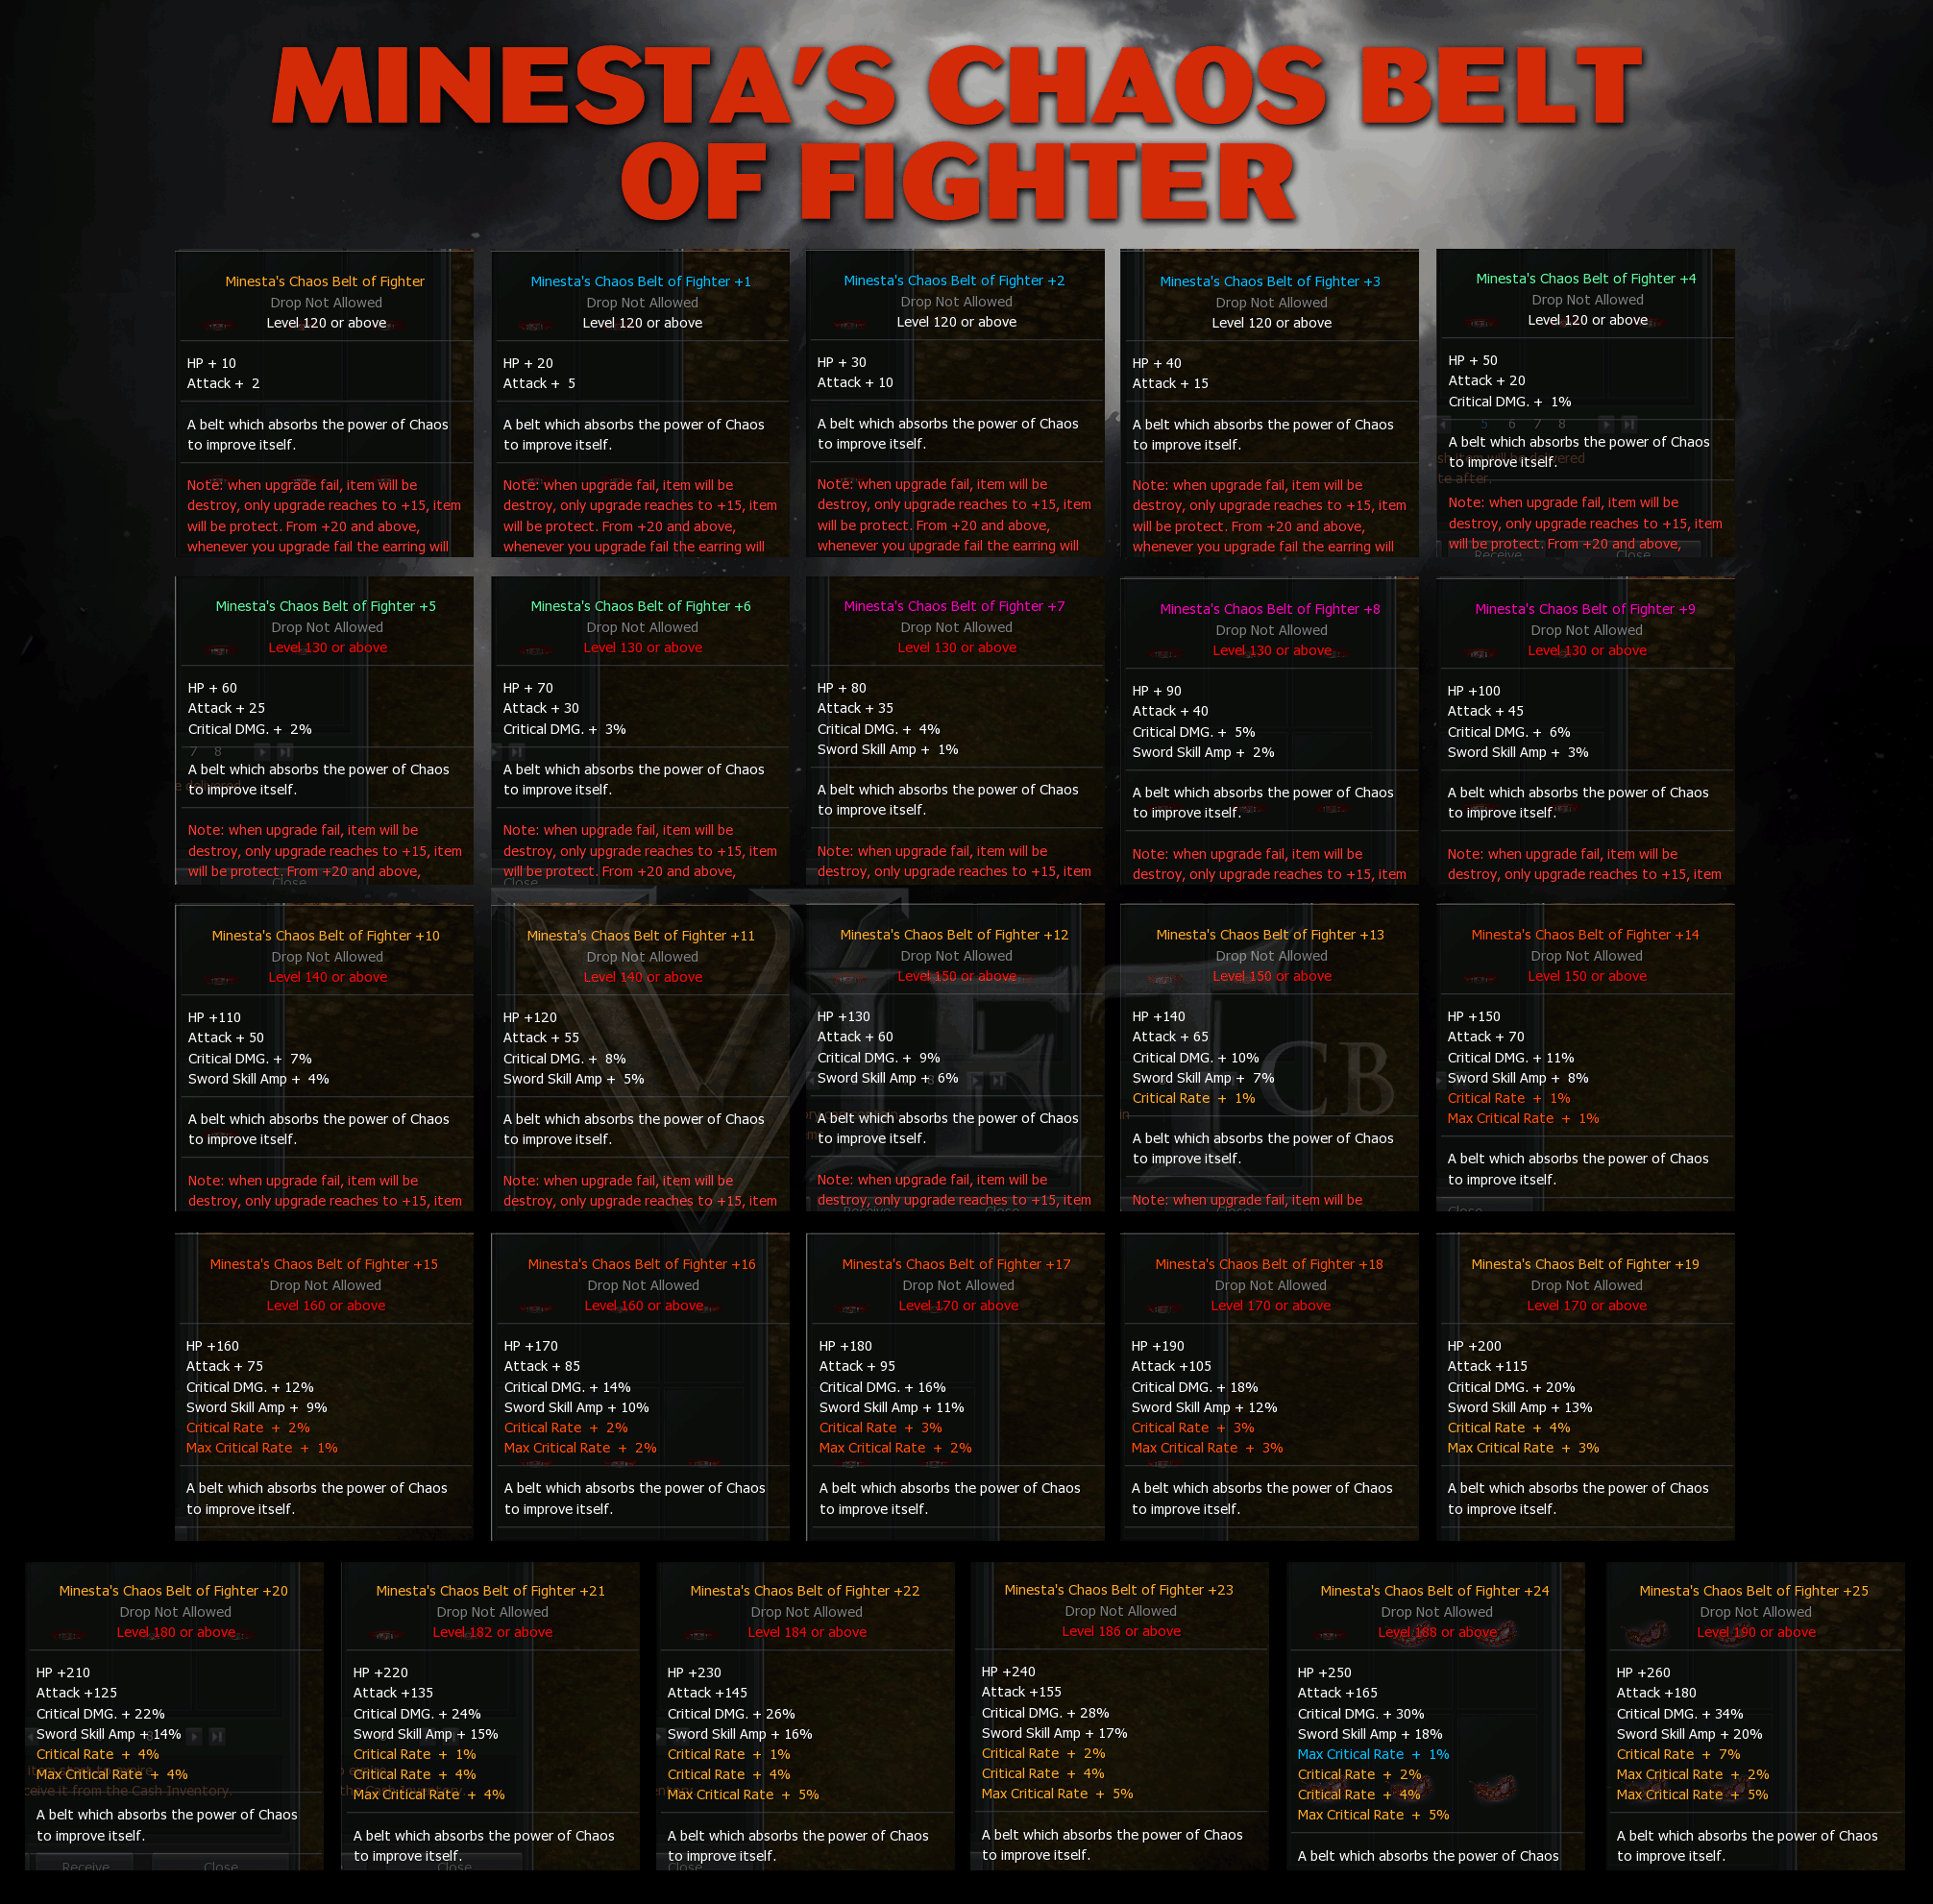 Chaos-Belt-Fighter.gif